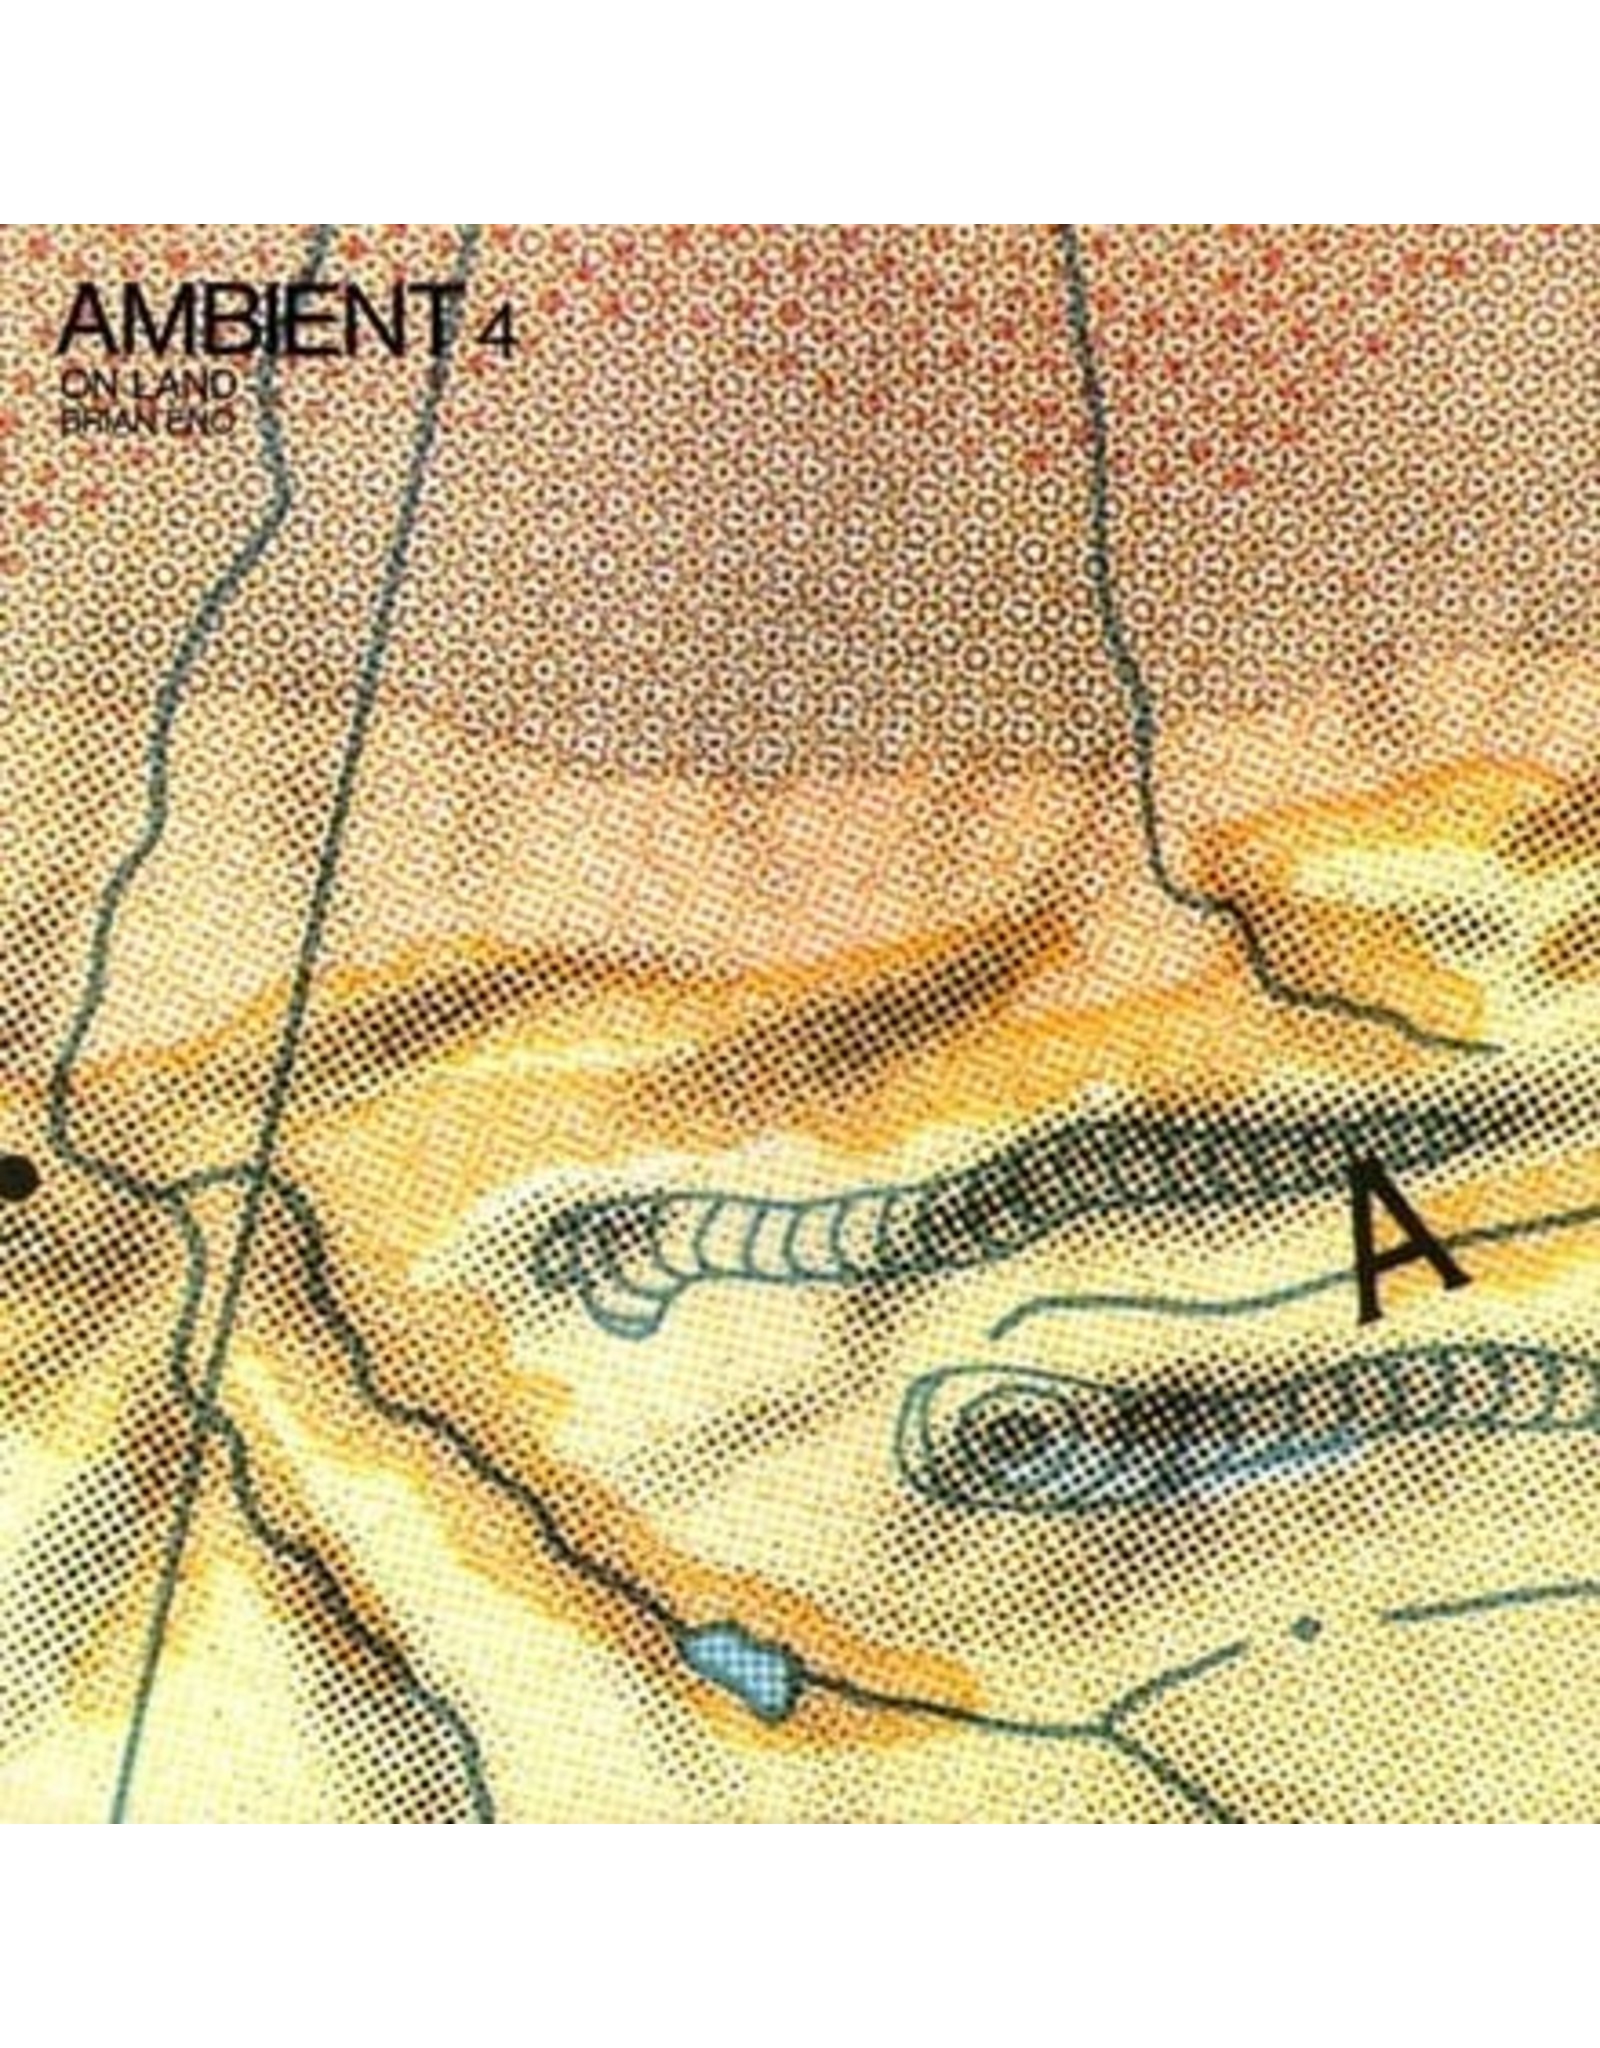 Astralwerks Eno, Brian: Ambient 4: On Land LP